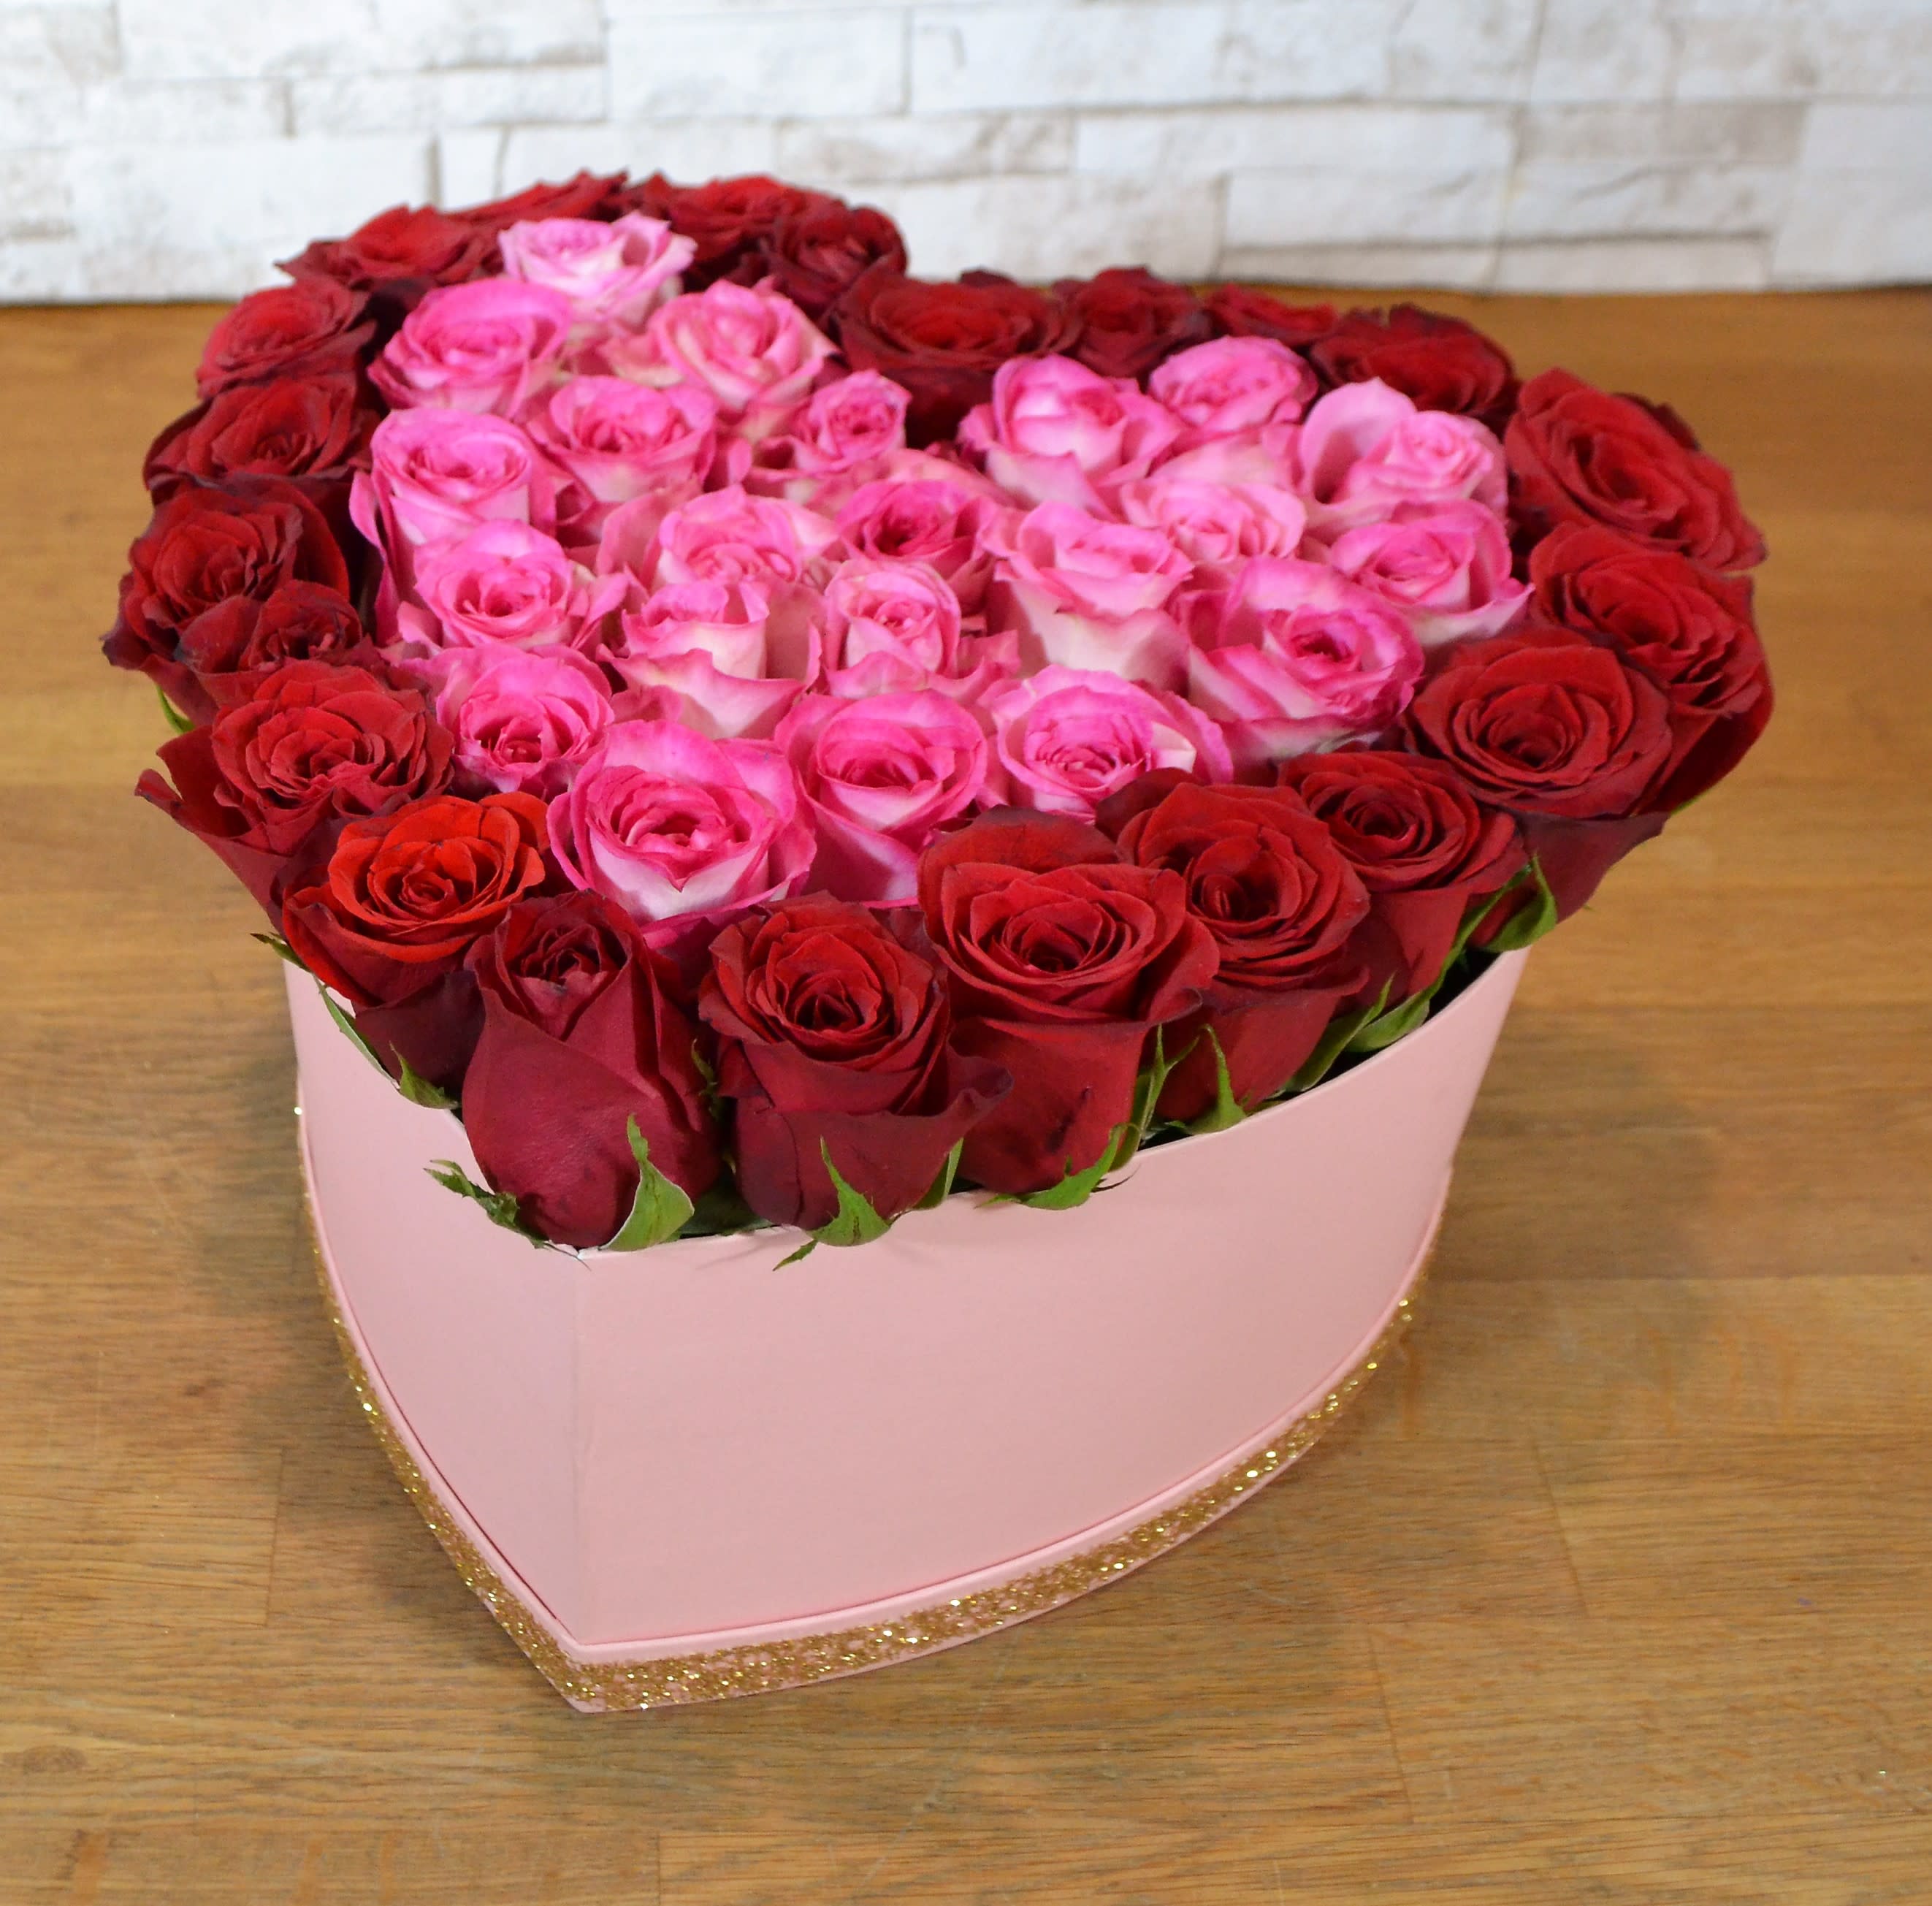 Love with Red & Pink Roses - Arabian Petals (7018042523812)